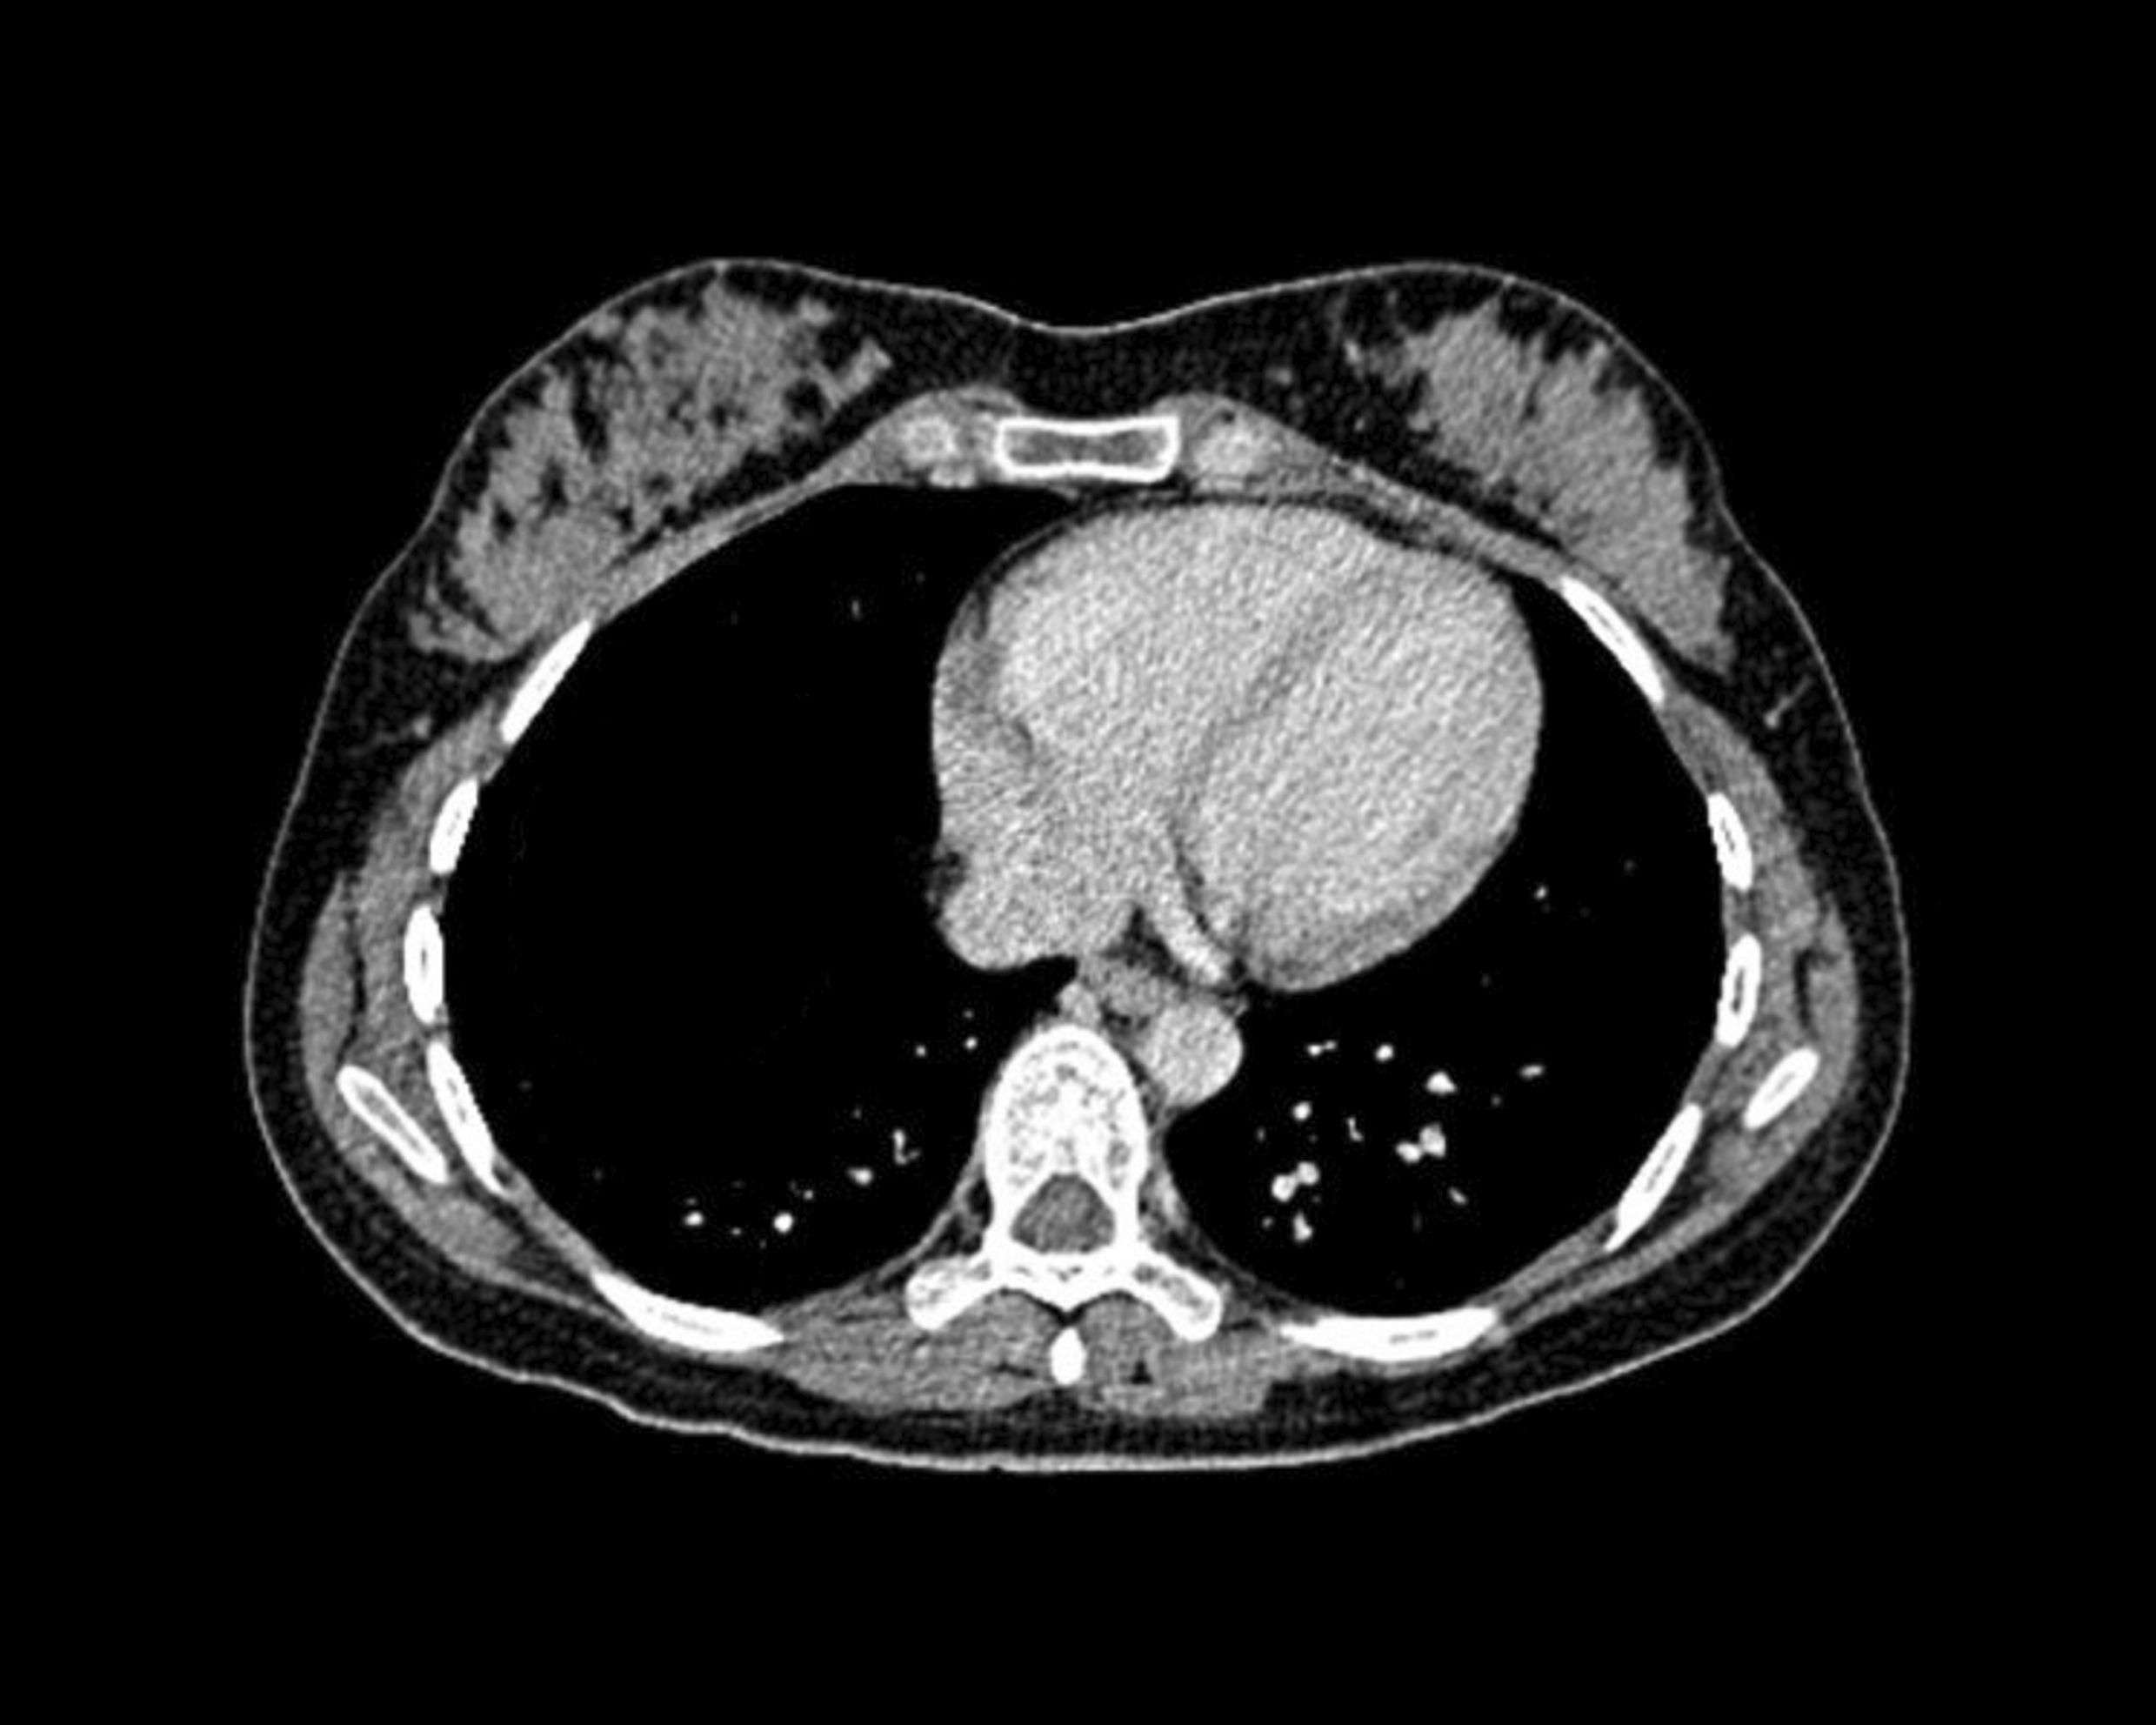 CT Lung Cancer Screening â Issues to Consider